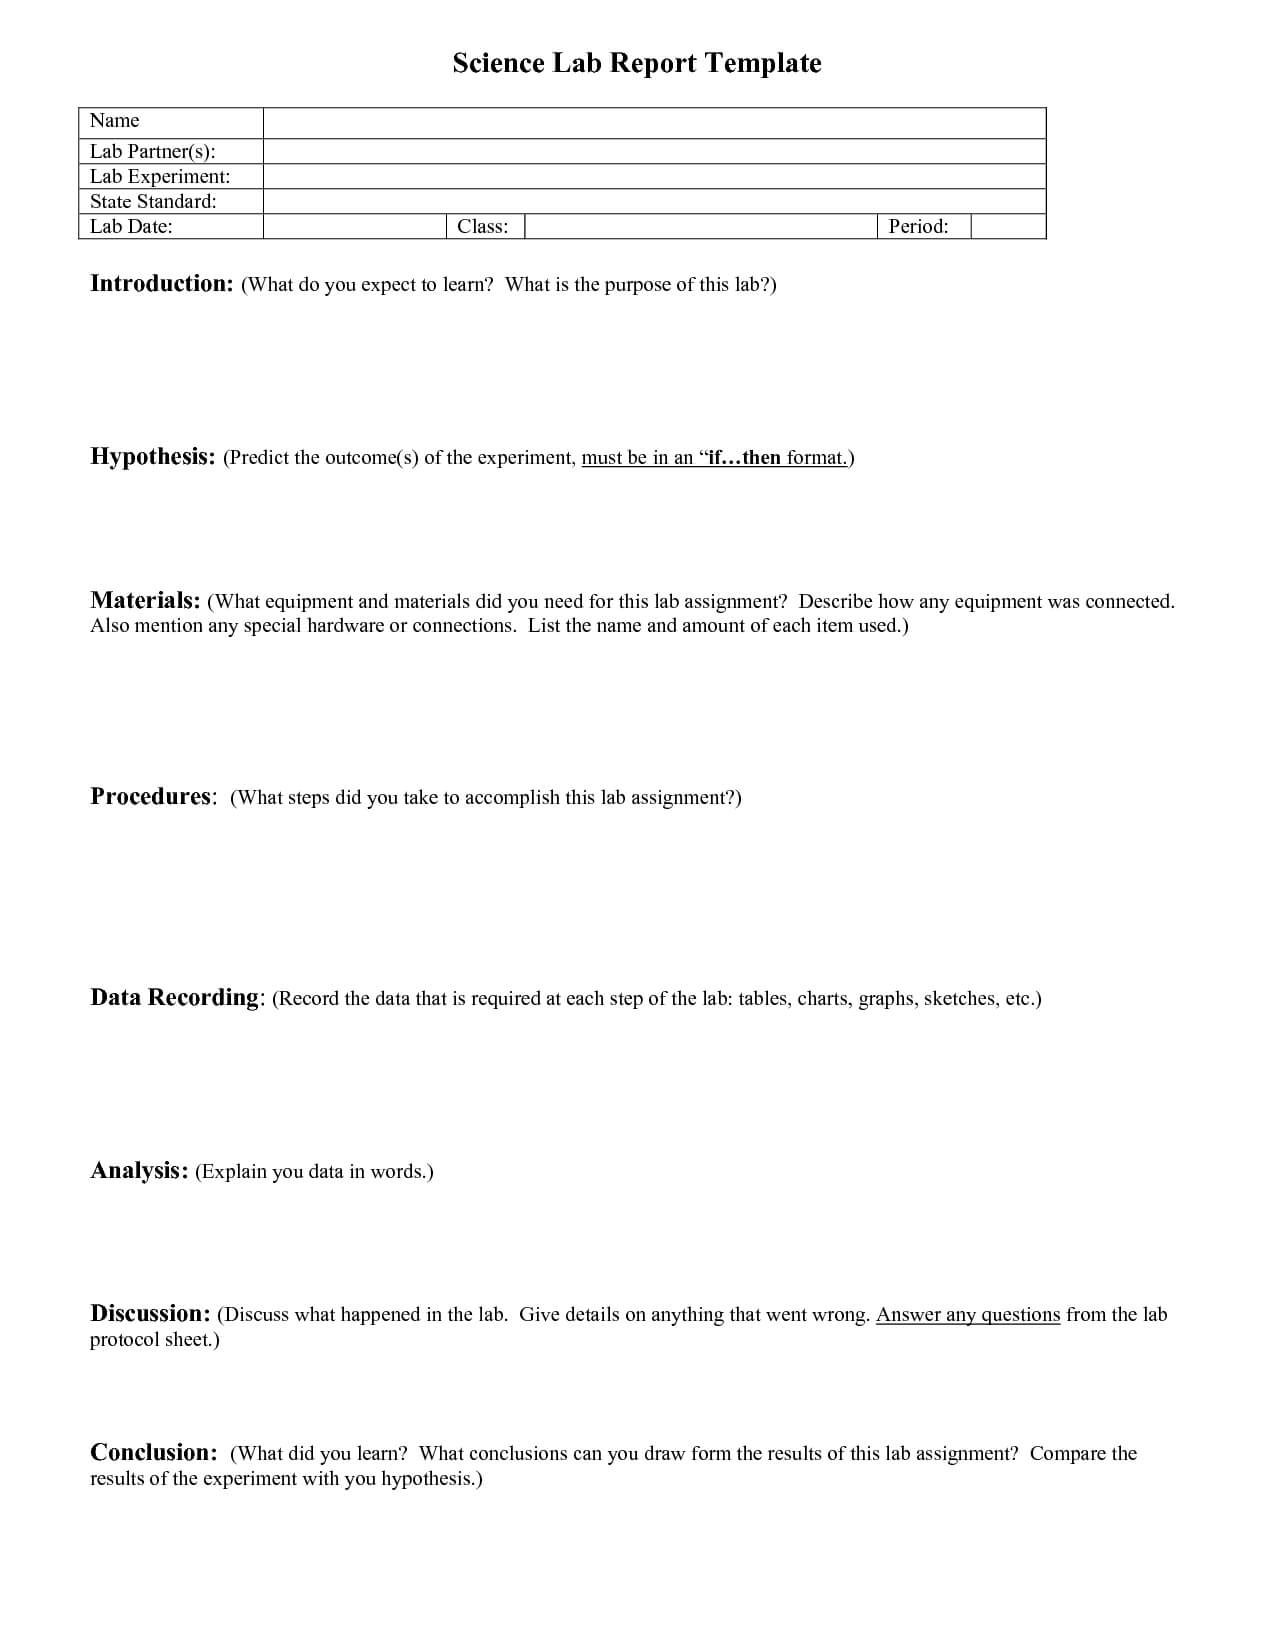 Science Report Outline – – Yahoo Image Search Results Throughout Science Lab Report Template